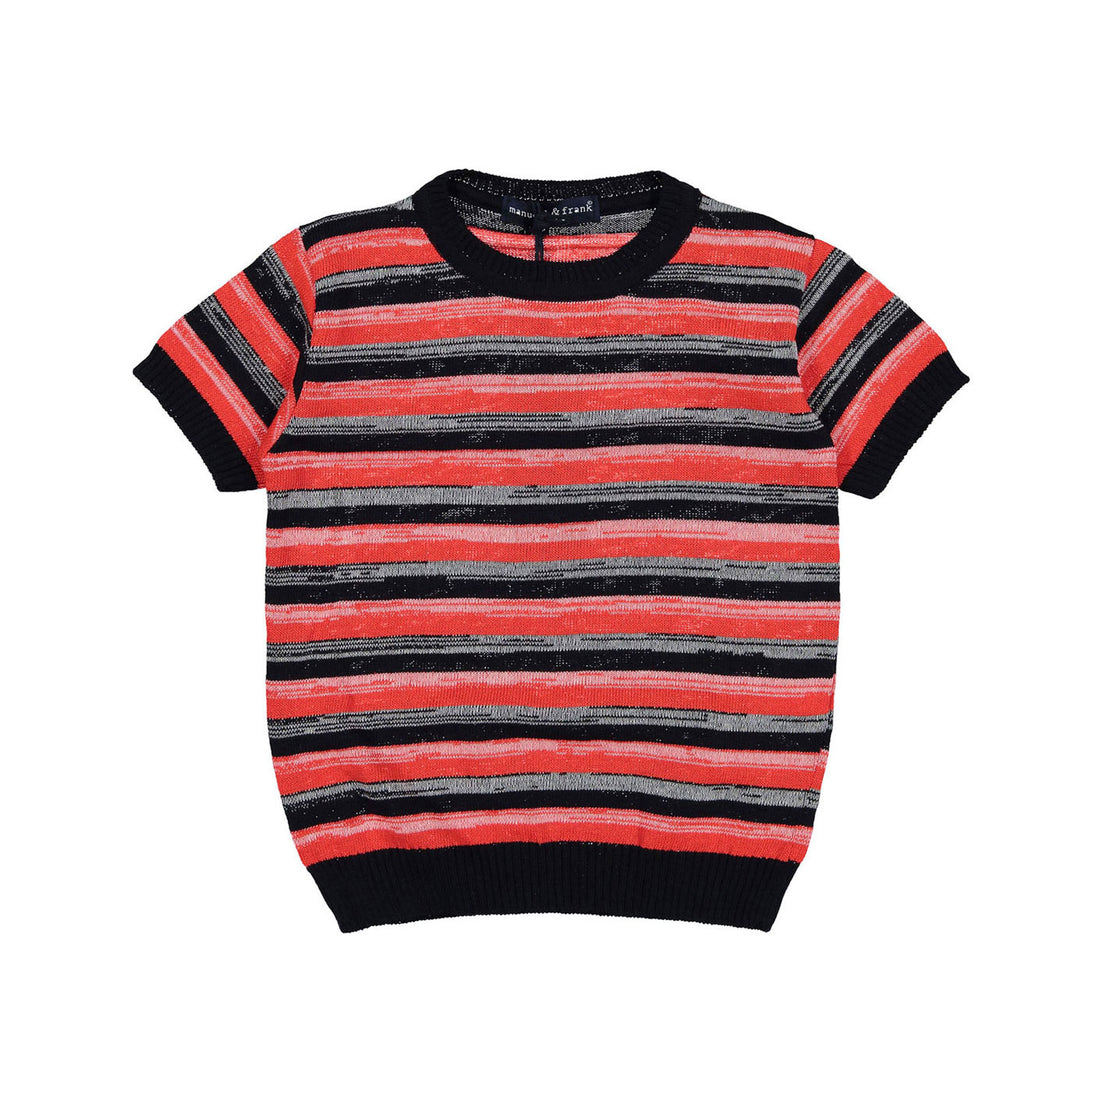 Manuelle Frank Red/Blue/White Striped Knit Top